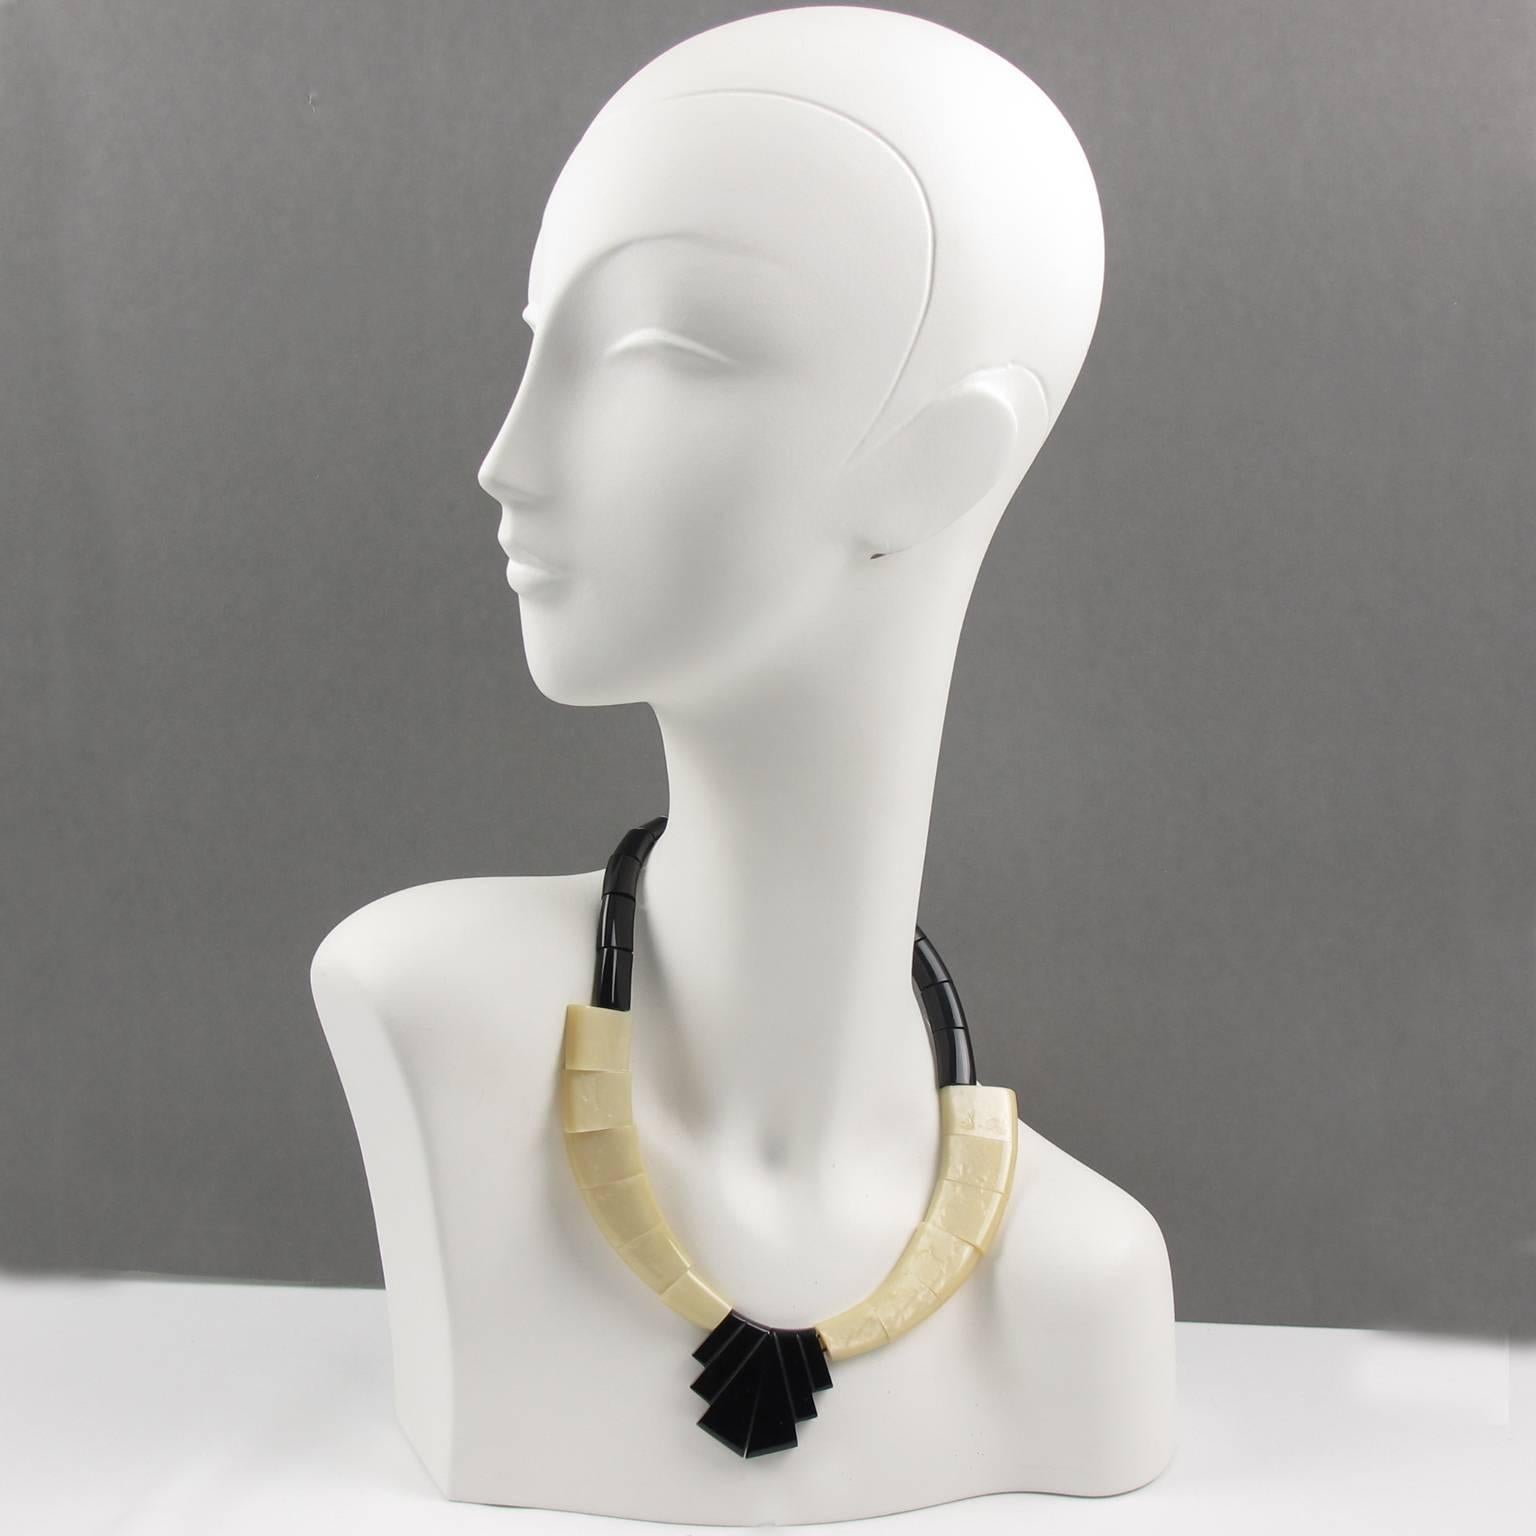 Rare vintage AUGUSTE BONAZ France signed Art Deco Galalith* necklace. Superb geometric shape with black and moire off-white colors. Signature engraved at the back. Metal barrel screw closing clasp. Circa 1925s. Excellent vintage